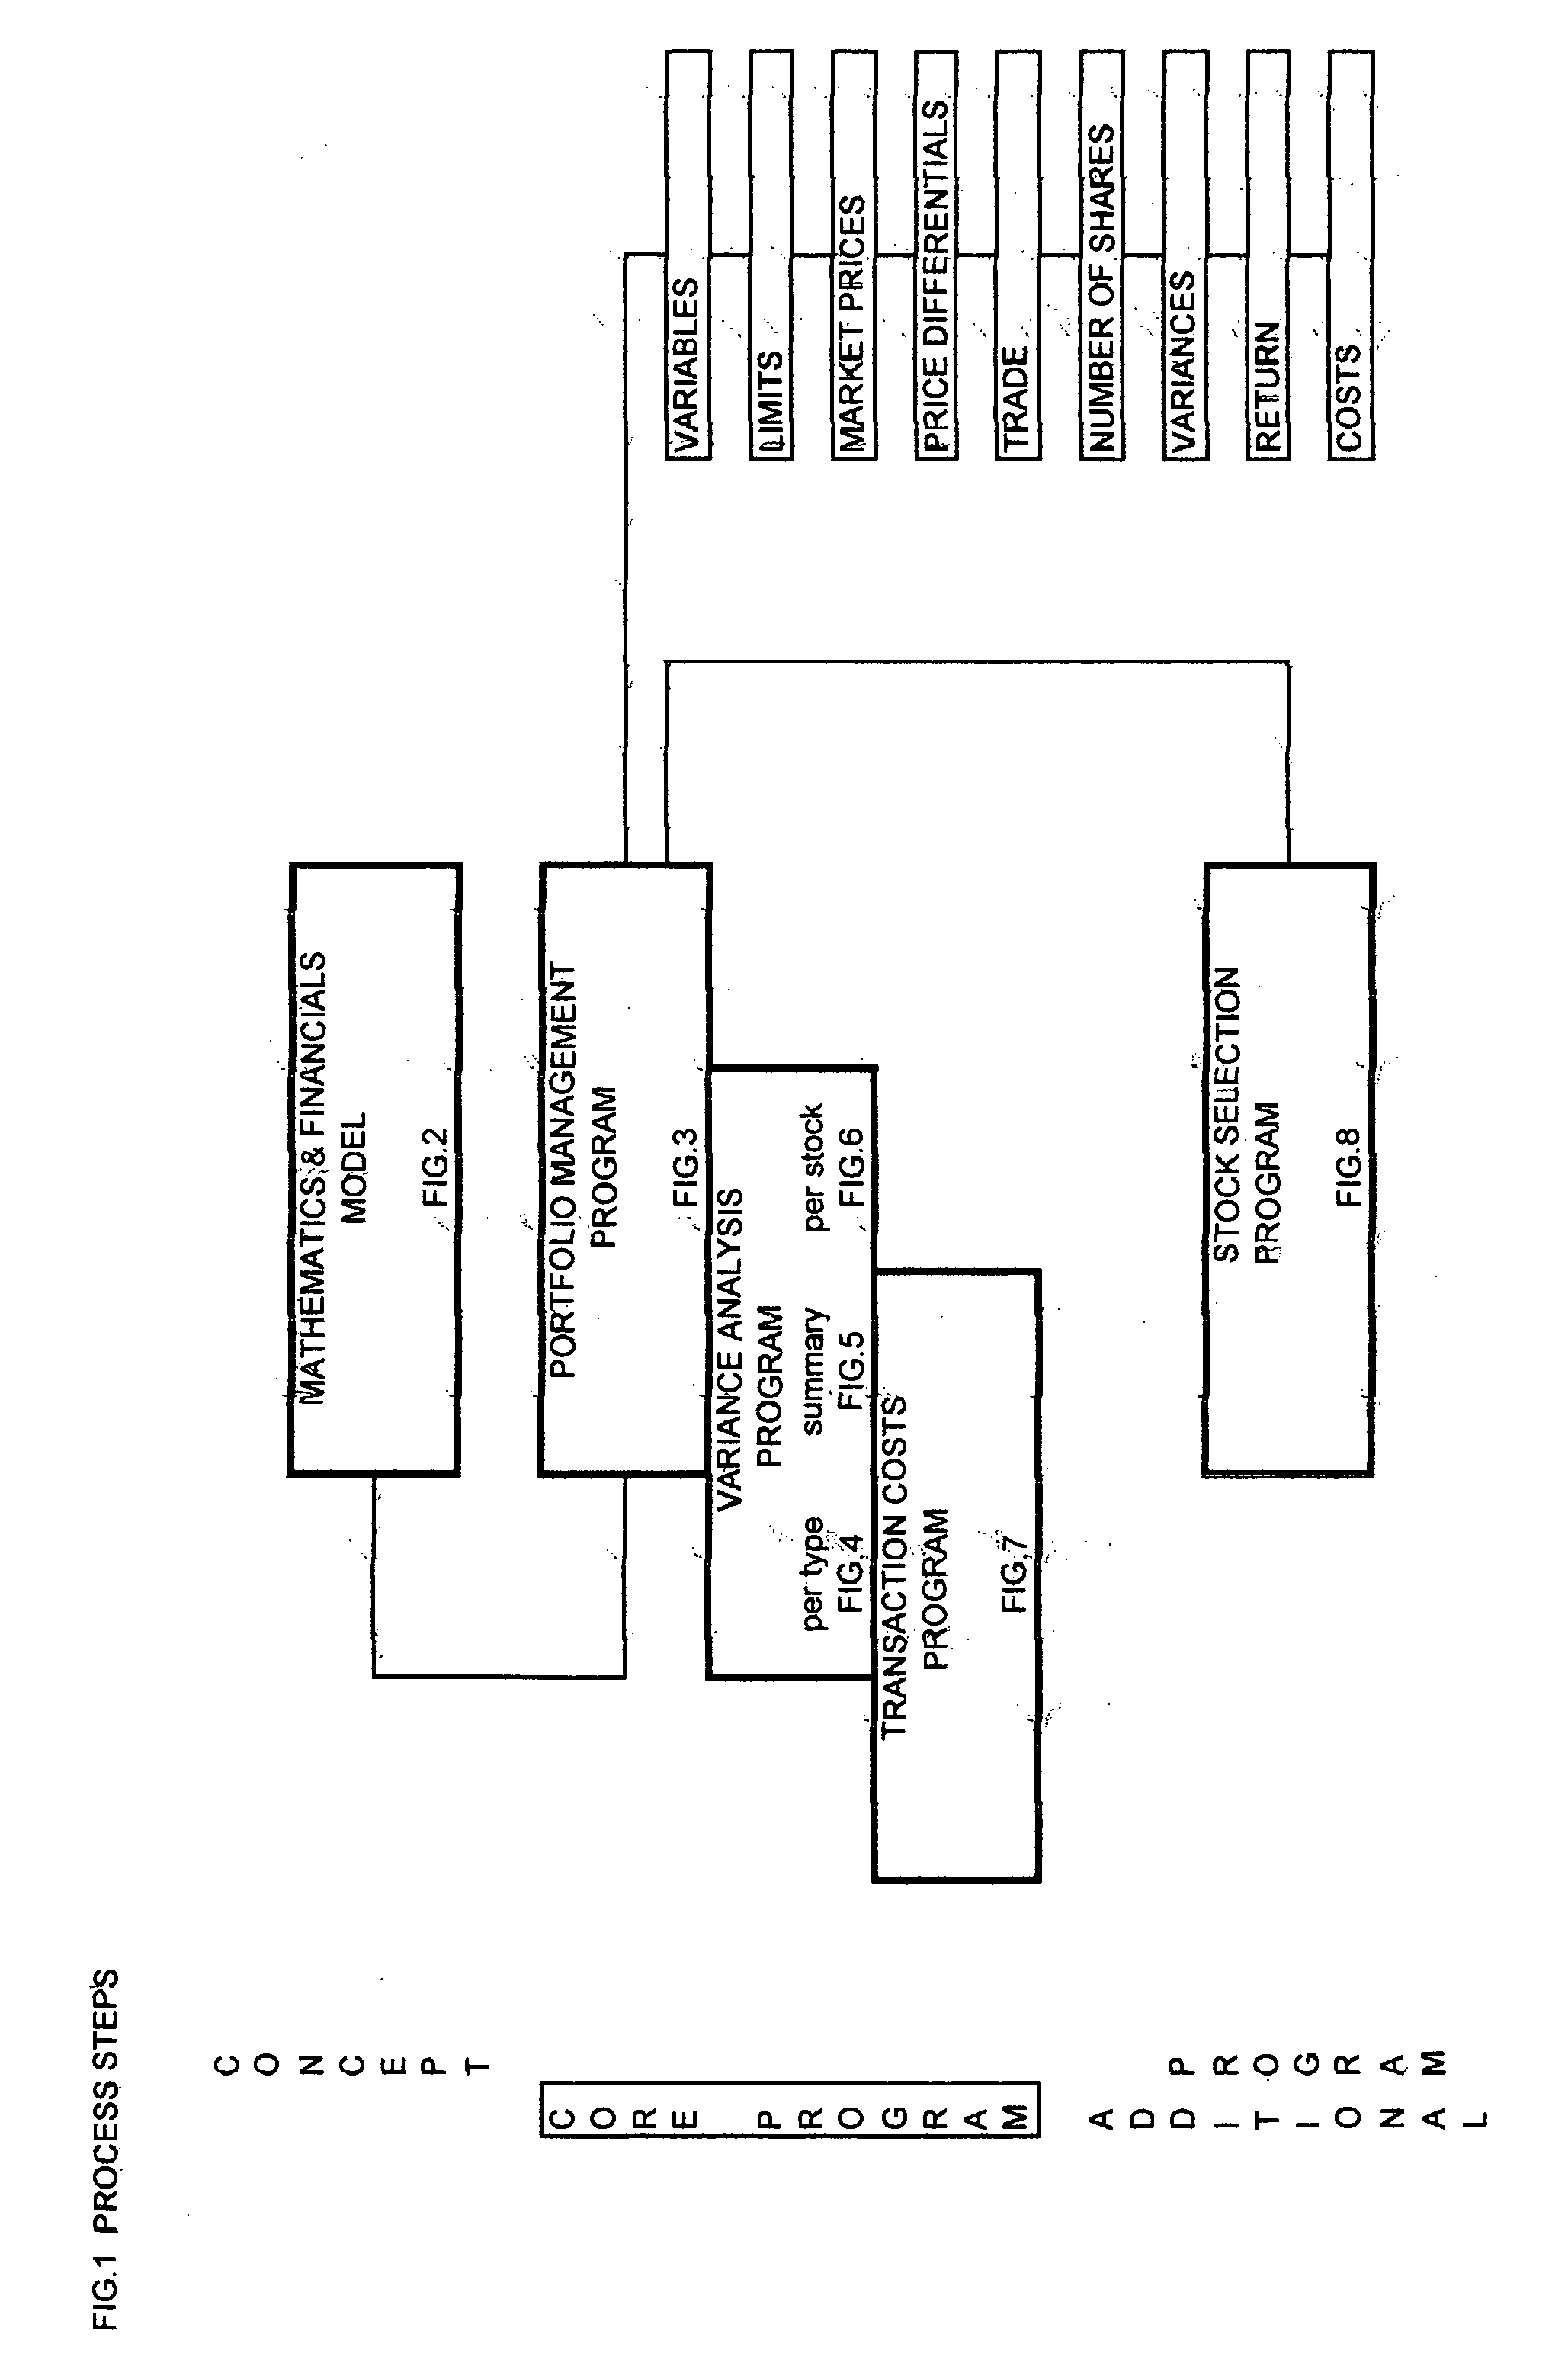 System for optimizing the return of an investment portfolio, using a method of multiple share combinations